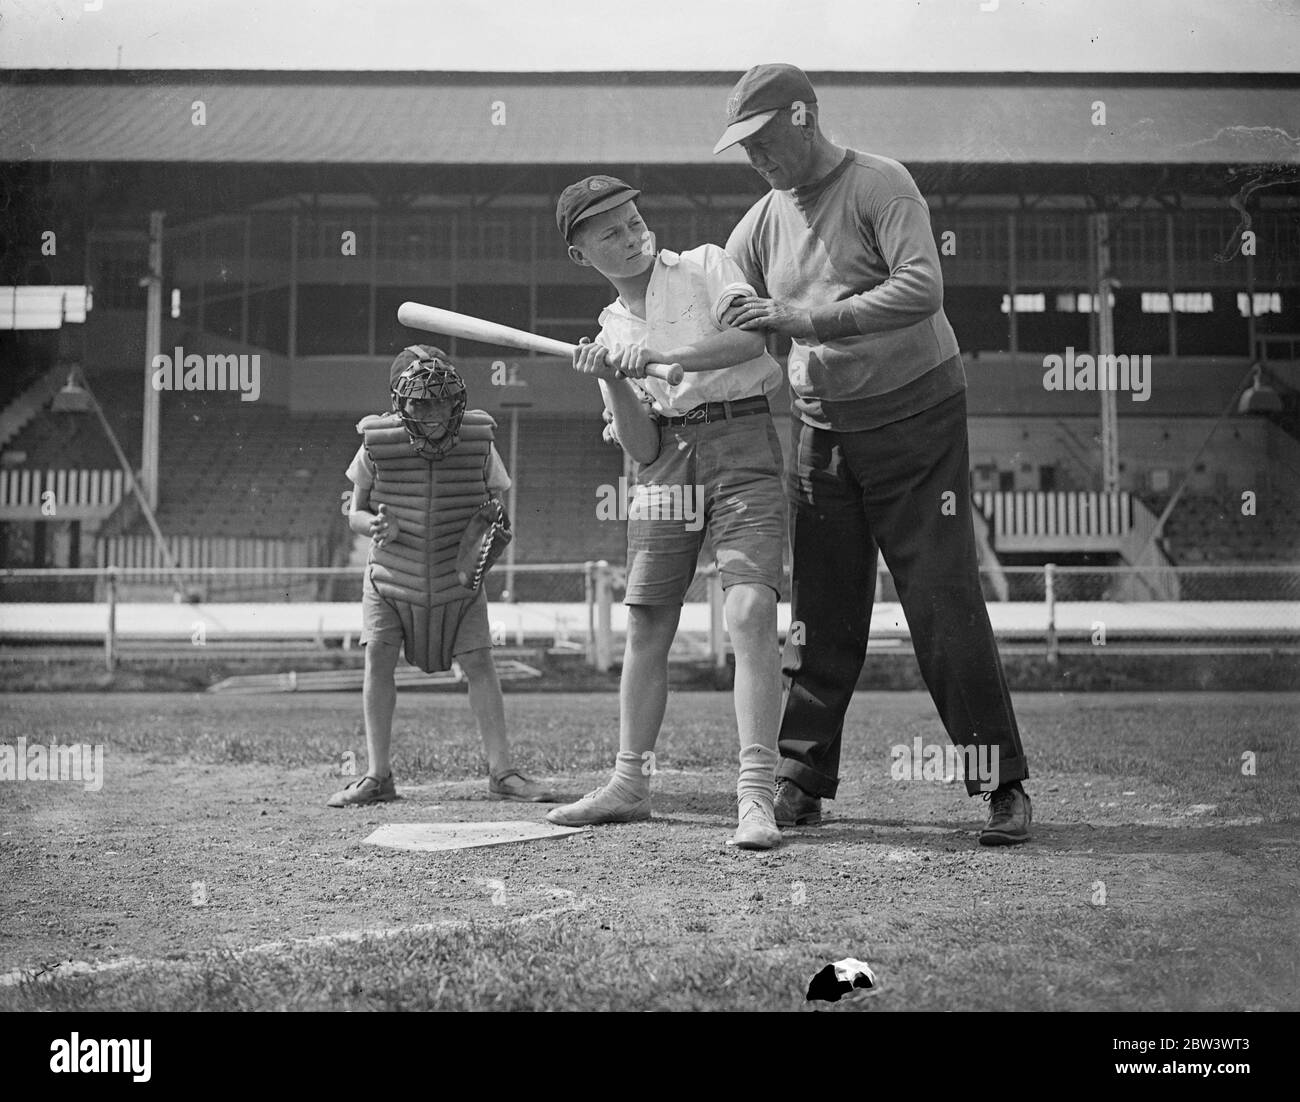 A Hundred London Boys Learn How To Play Baseball At The White City To discover young baseball talent , a hundred boys turned out for tuition at the White City Stadium under the guidance of  Doc  Hayden , the American manager - coach . Small - sized baseball gloves were provided , and the boys received instruction in fieldinf , pitching and batting . Boys who show the highest promise will play next year in a new juniour league . Photo shows :  Doc  Hayden giving instruction in batting . 17 Aug 1936 Stock Photo